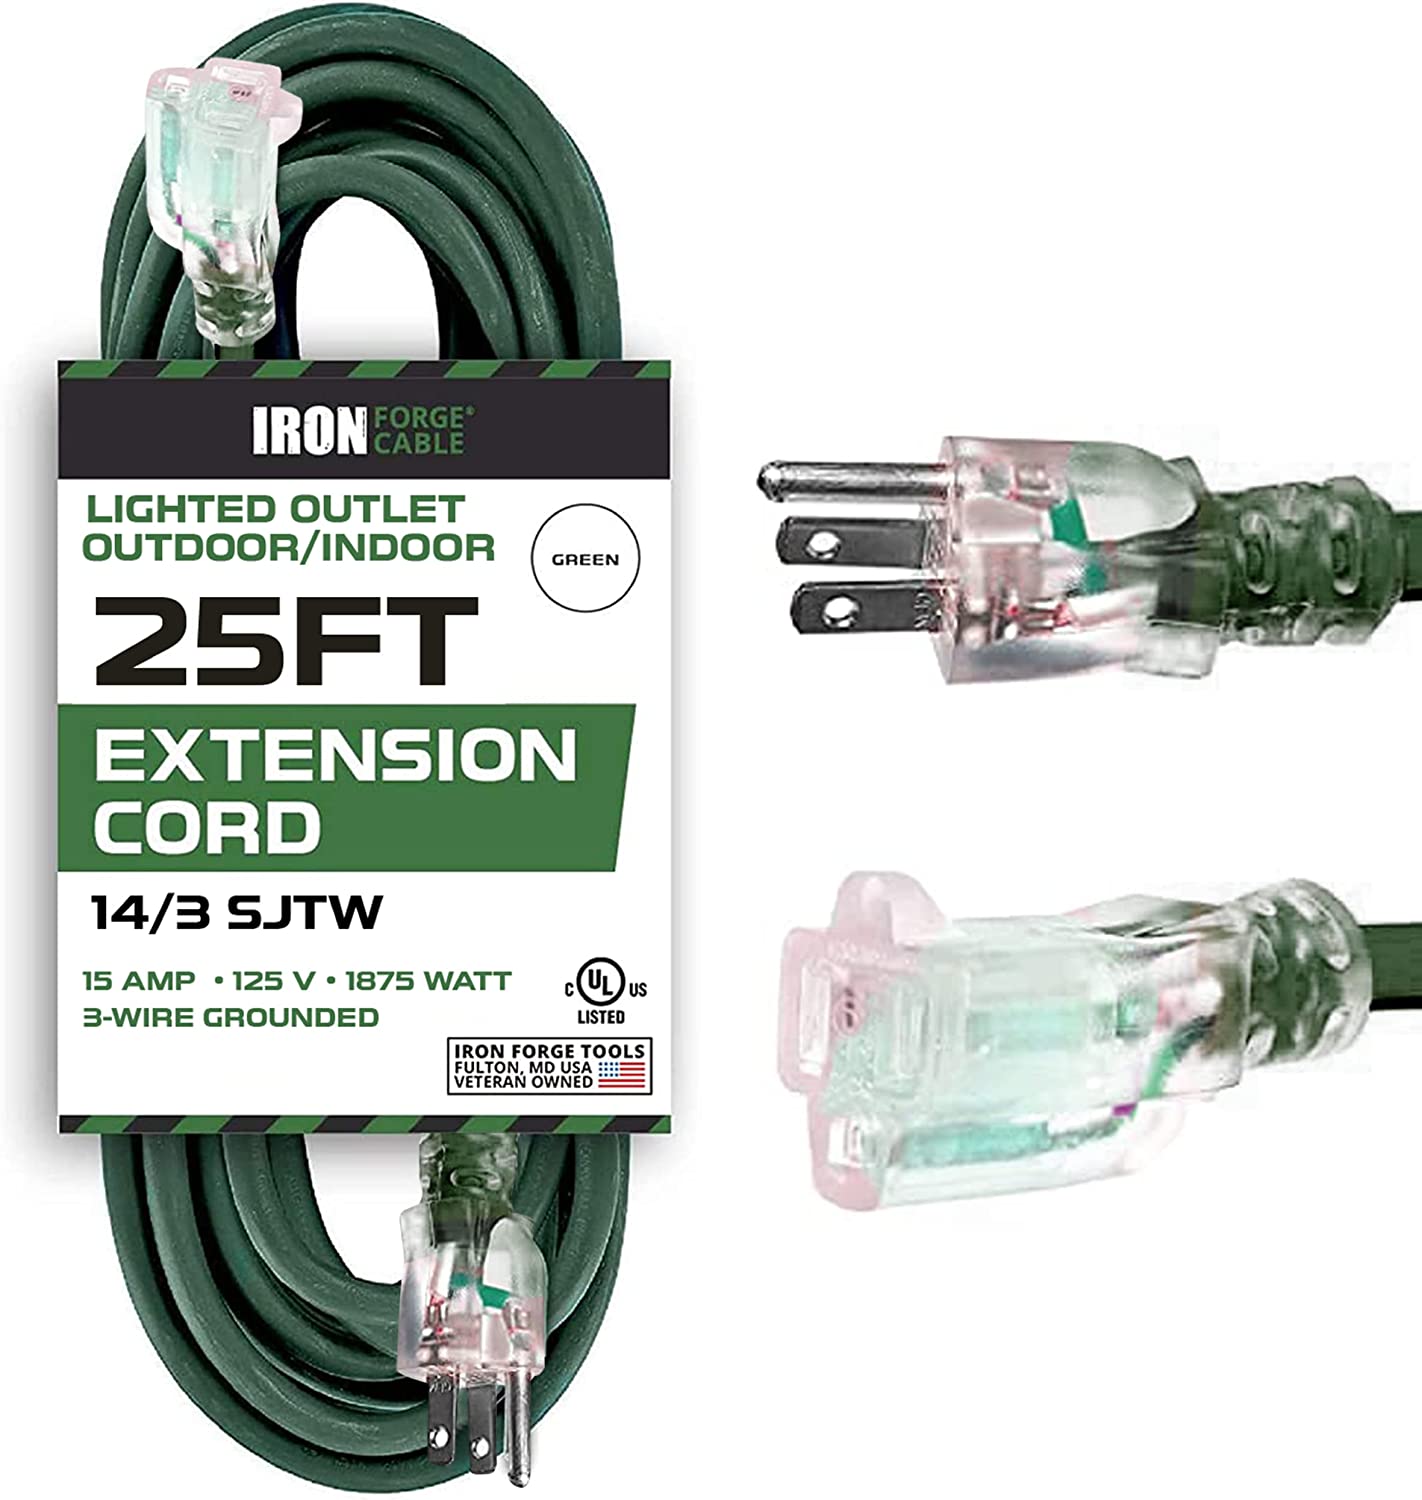 25 Foot Lighted Outdoor Extension Cord - 14/3 SJTW Heavy Duty Green Extension Cable